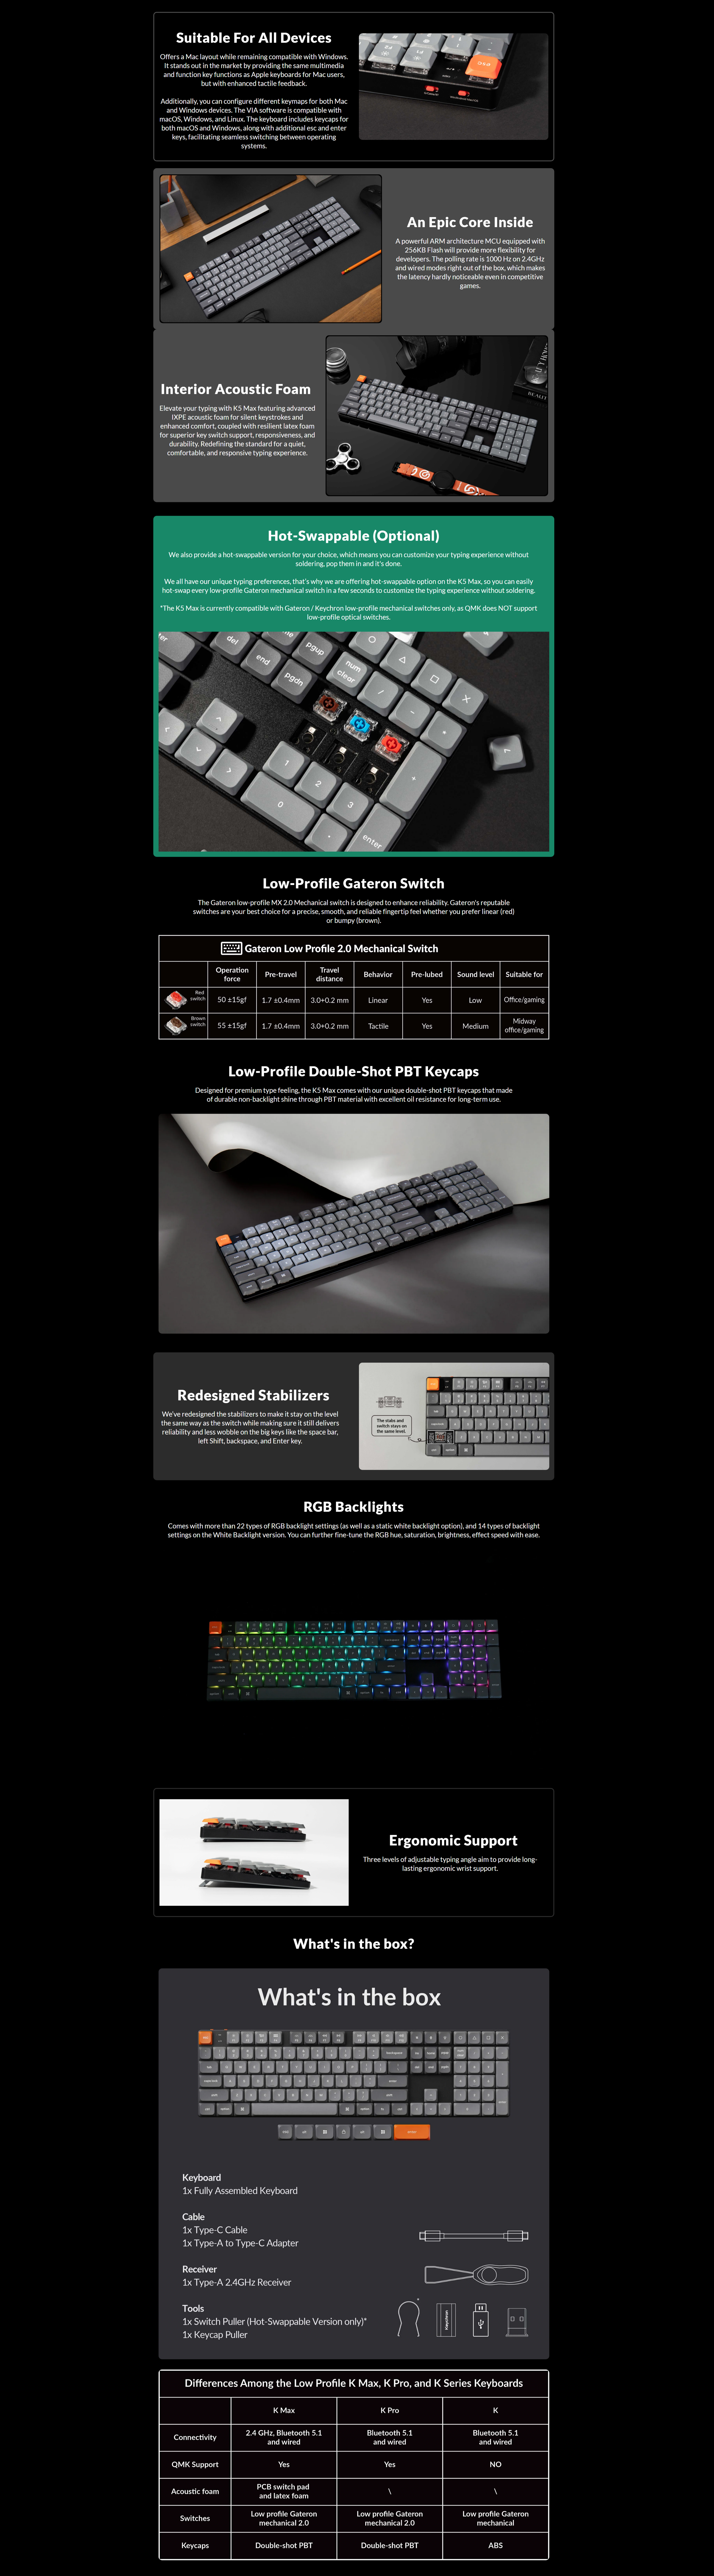 A large marketing image providing additional information about the product Keychron K5 Max QMK/VIA Wireless Custom Mechanical Keyboard (Gateron Brown Switch) - Additional alt info not provided